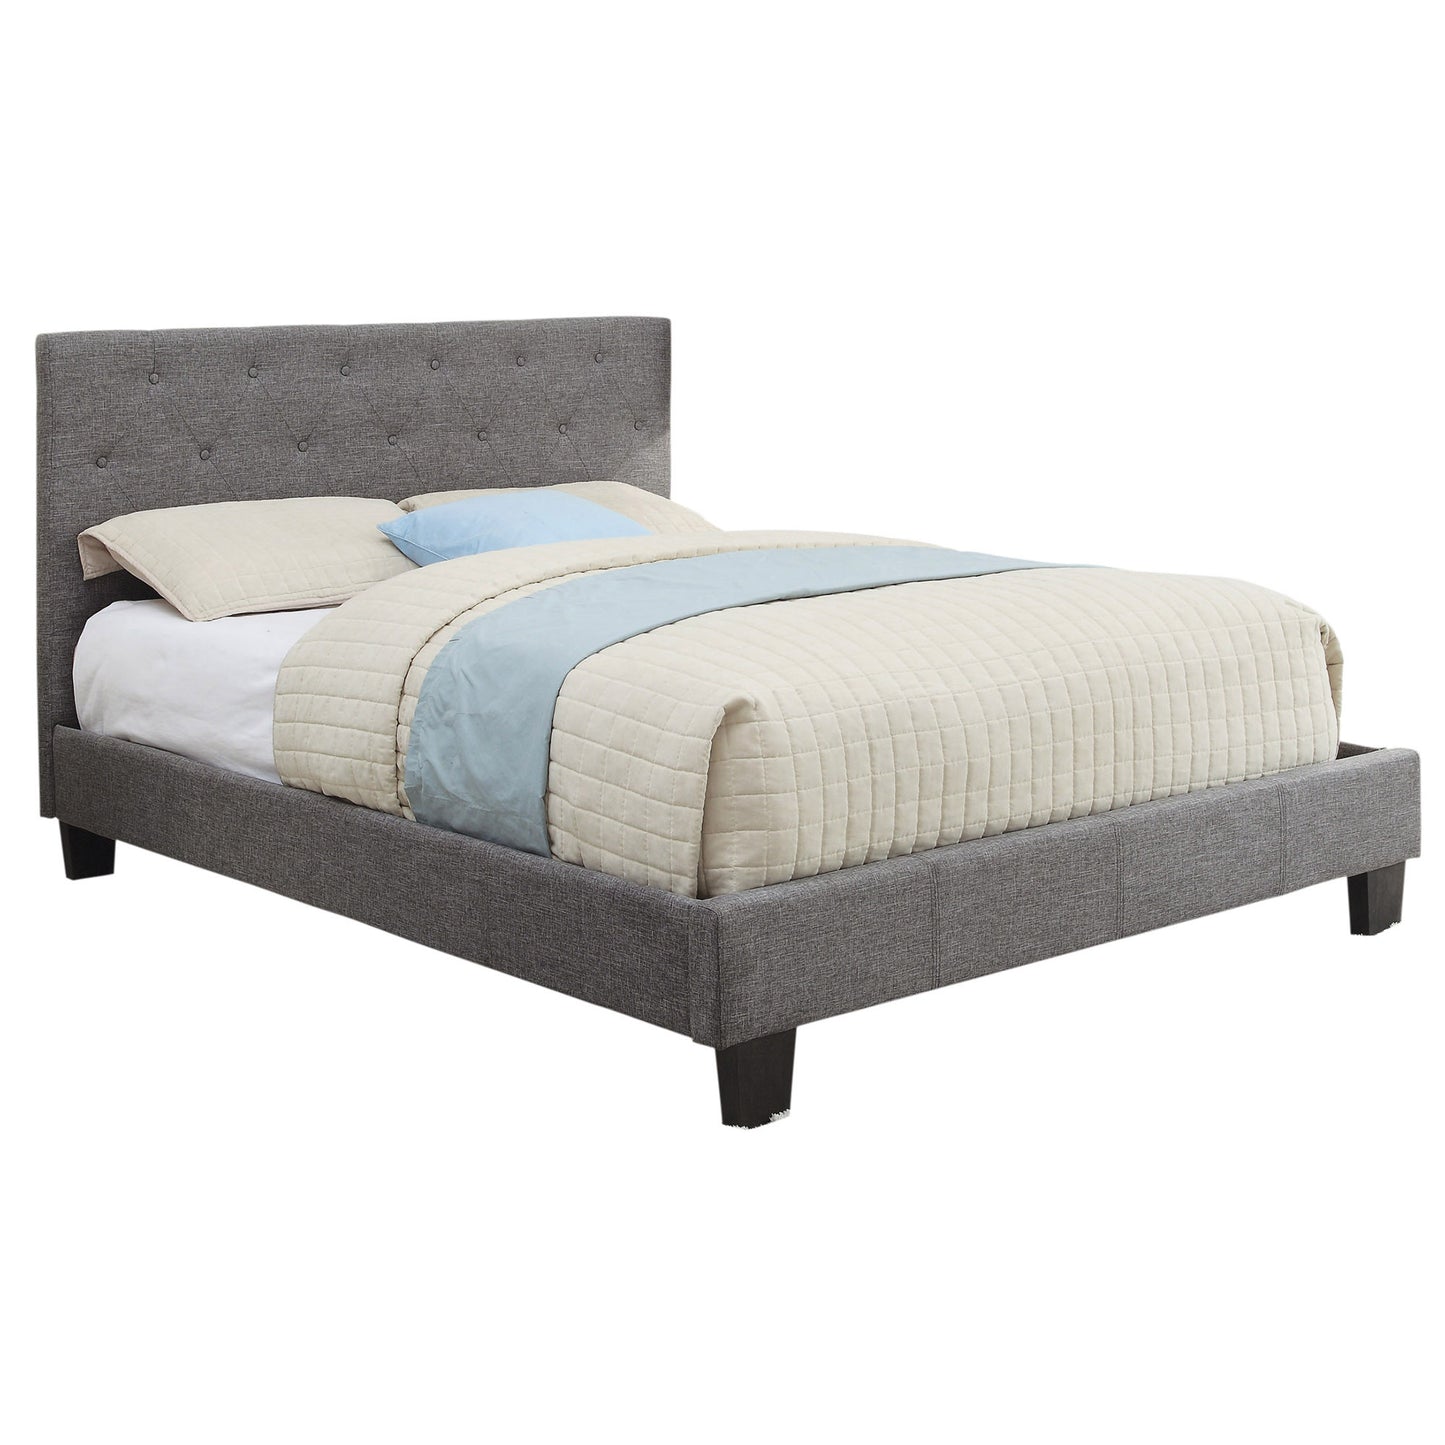 DOUBLE SIZE- (SUMMIT GREY- FLOOR MODEL)- FABRIC- BUTTON TUFTED- BED FRAME- WITH SLATS